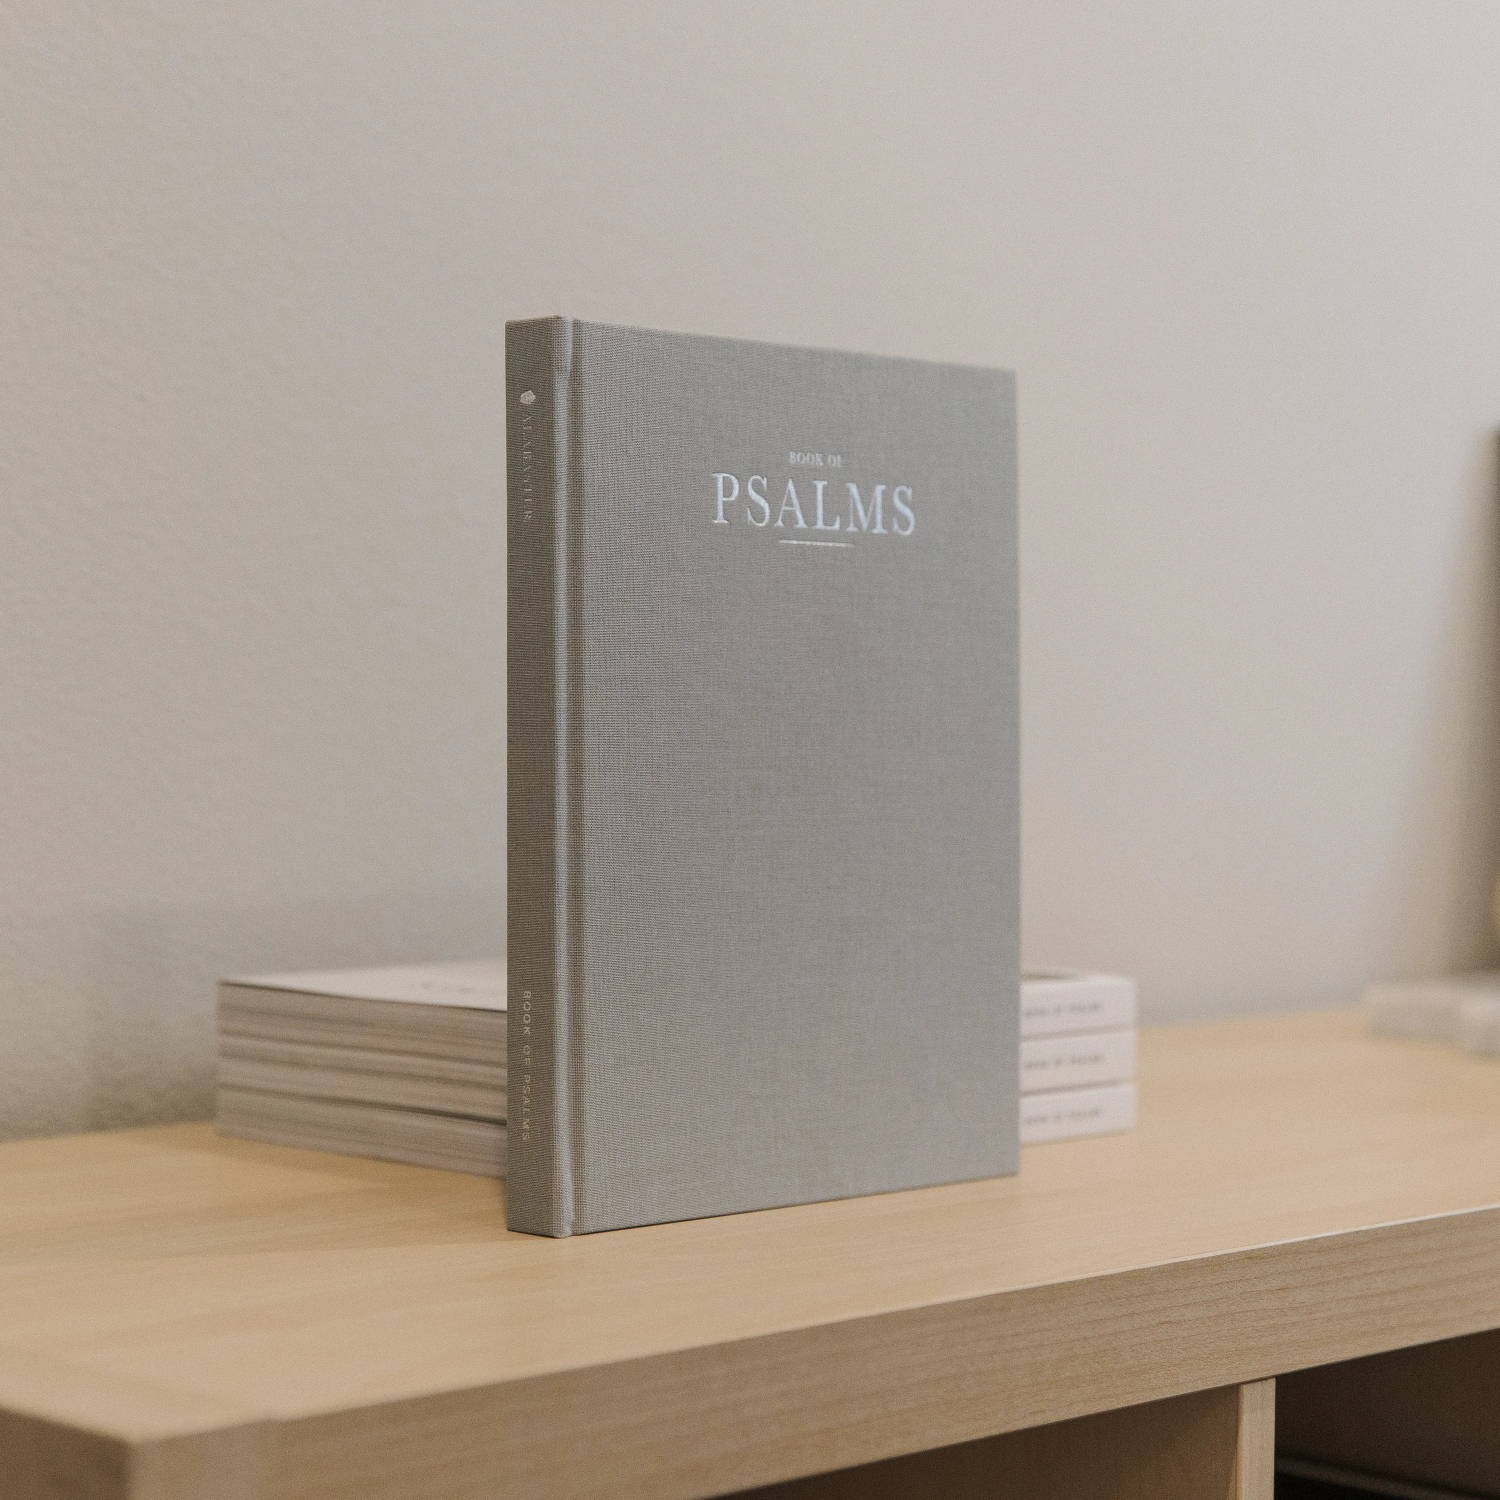 Alabaster's hardcover Book of Psalms